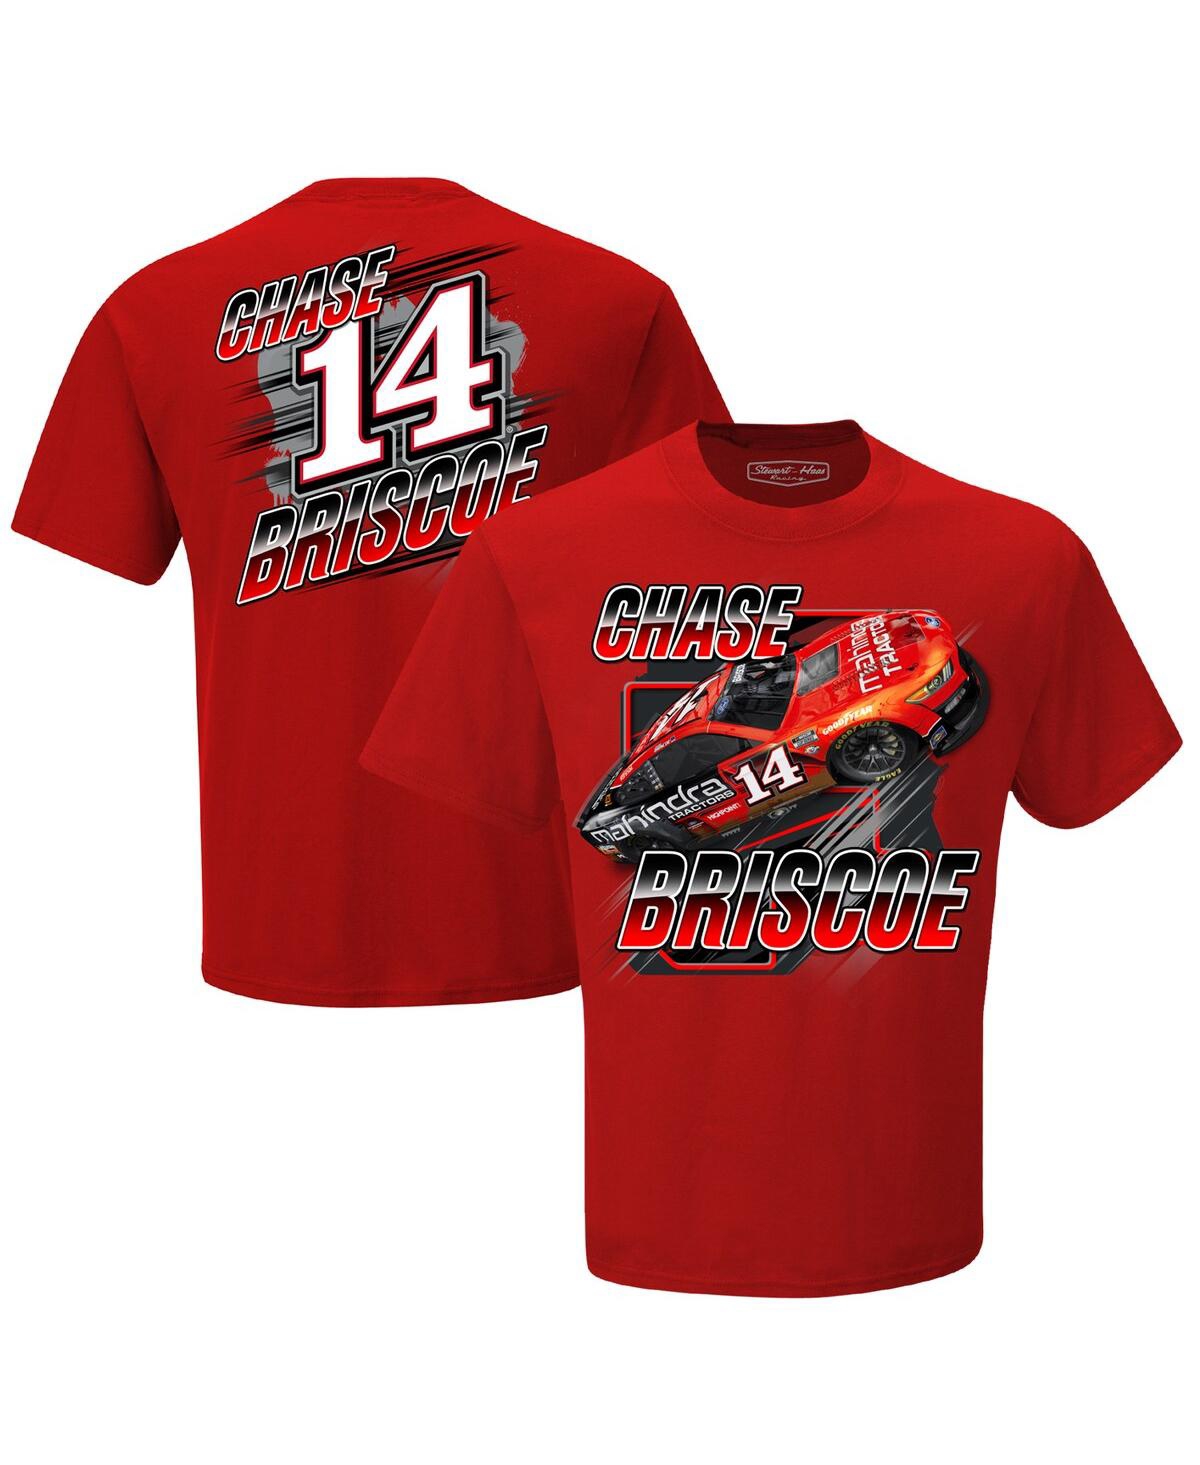 Stewart-haas Racing Team Collection Men's  Red Chase Briscoe Blister T-shirt